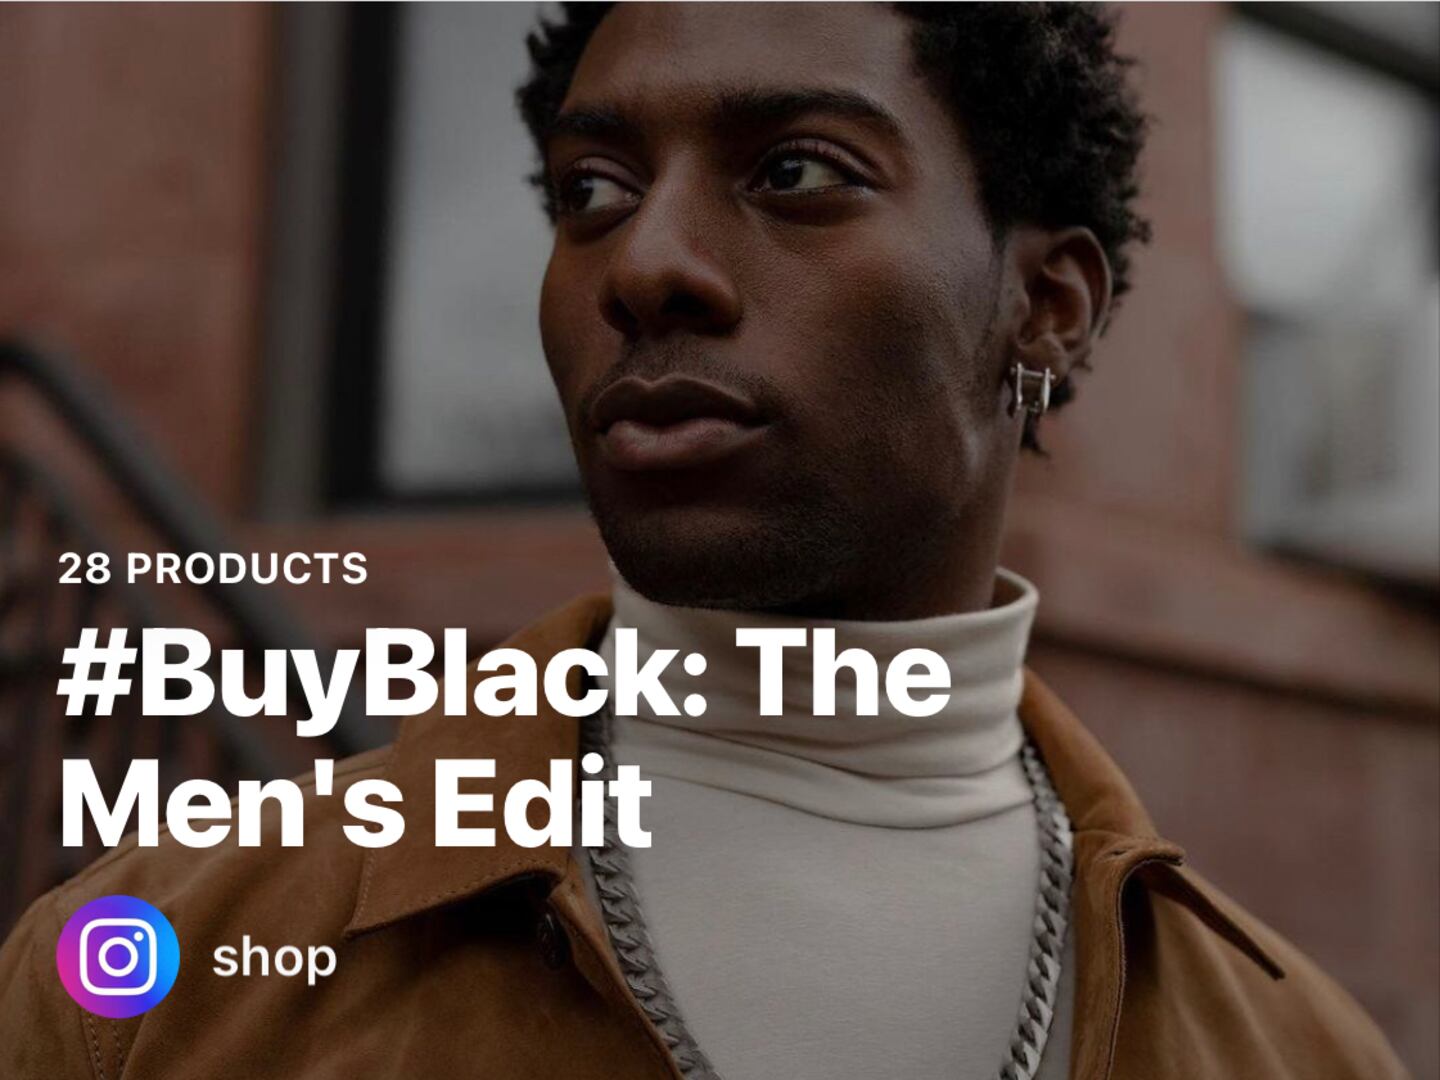 A landing page for Facebook, Inc.'s #BuyBlack initiative.